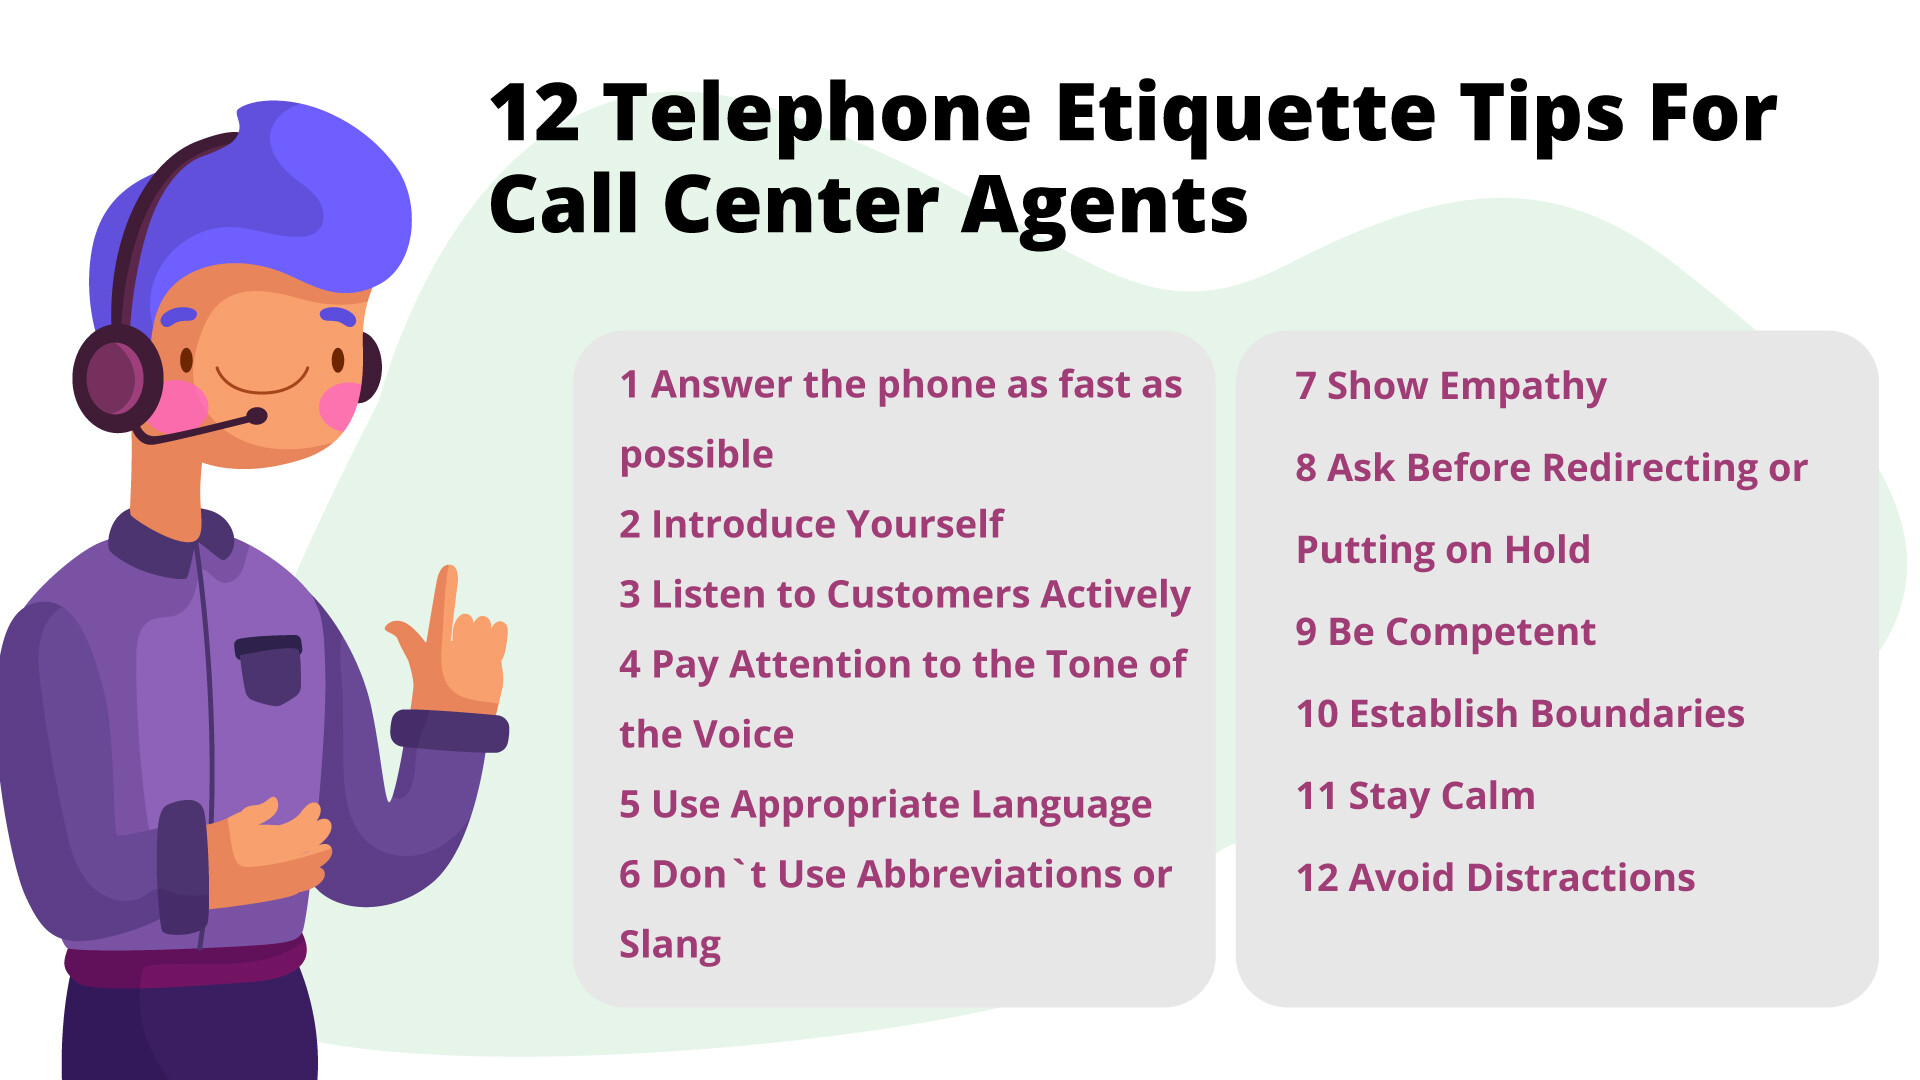 12 telephone etiquette tips for call center agents